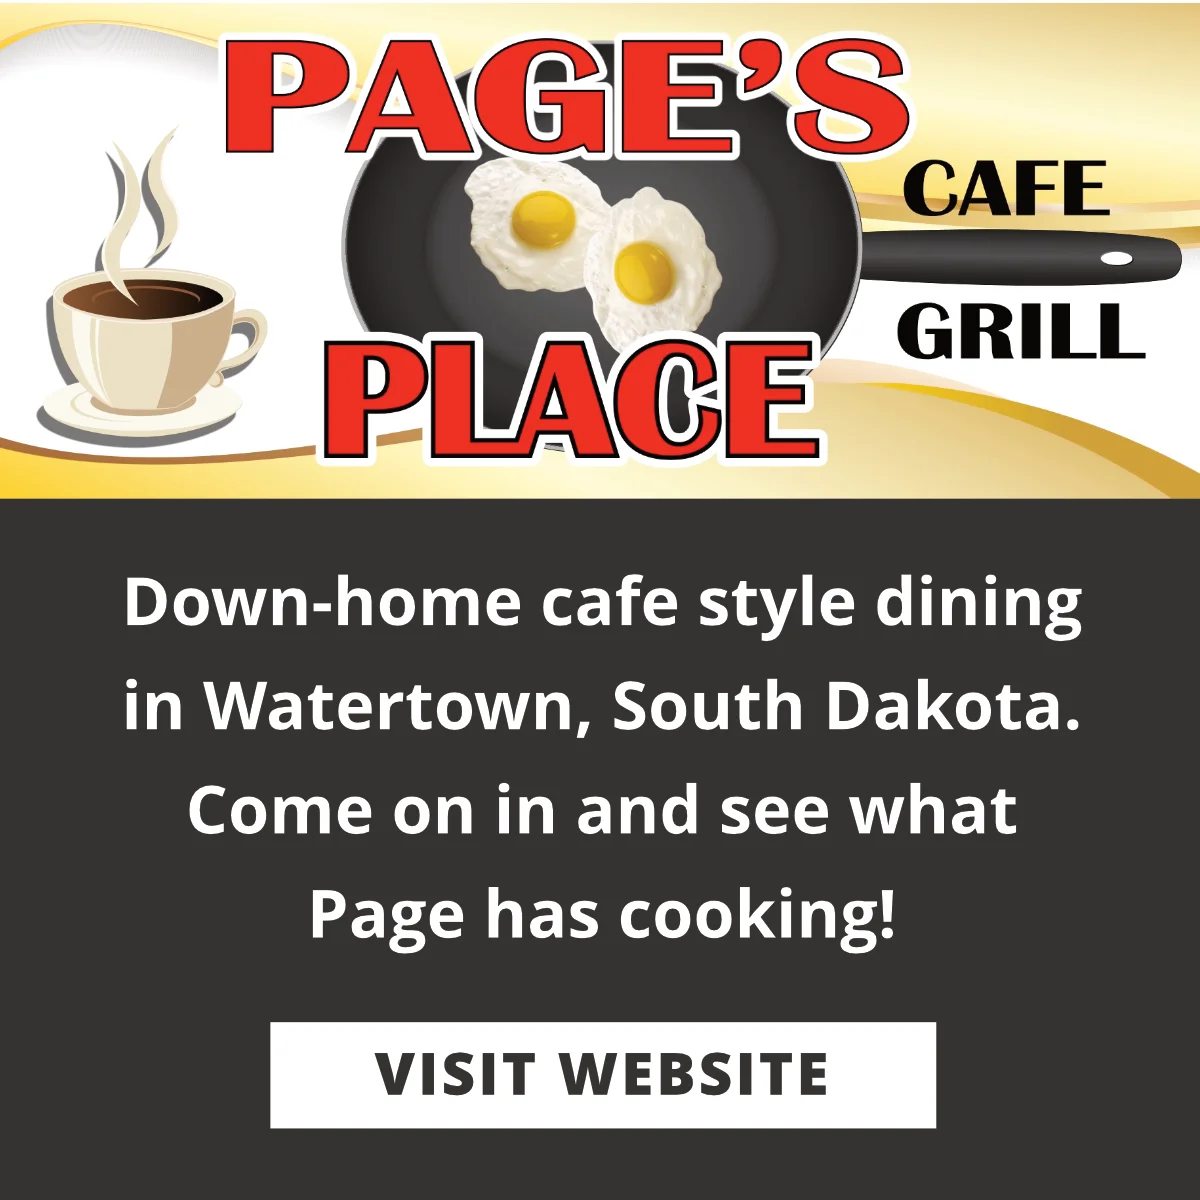 Pages Place Cafe & Grill - Watertown, SD.  Visit site.